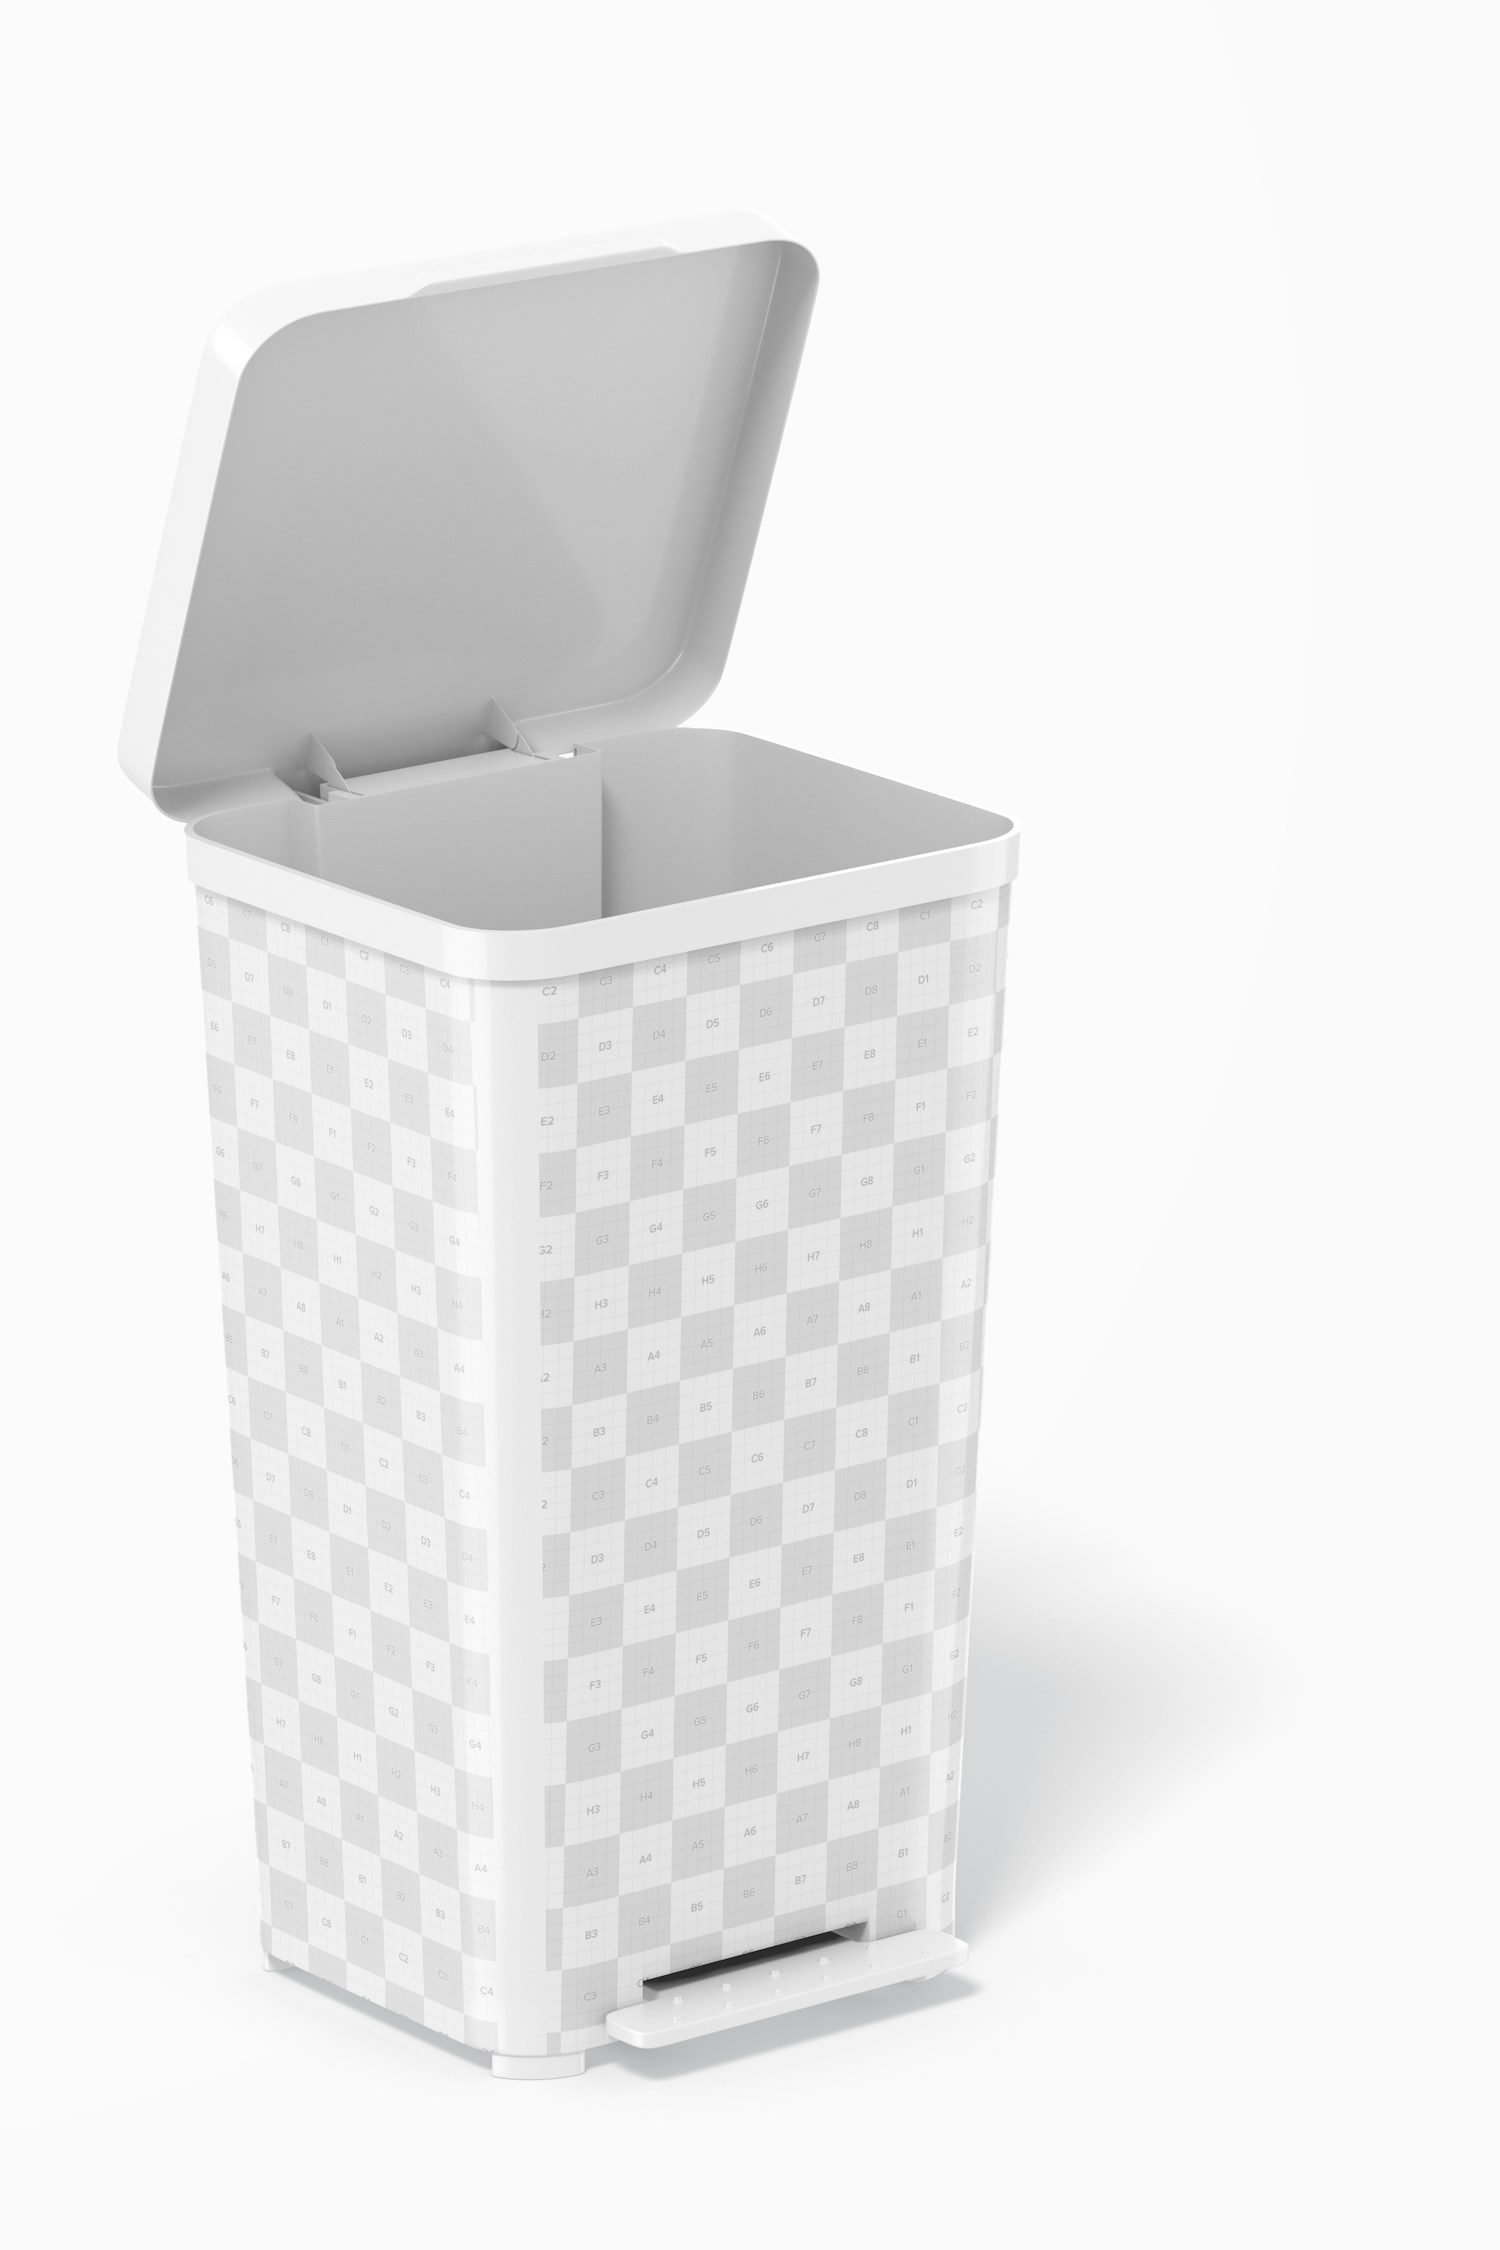 Cube Pedal Trash Can Mockup, Right View